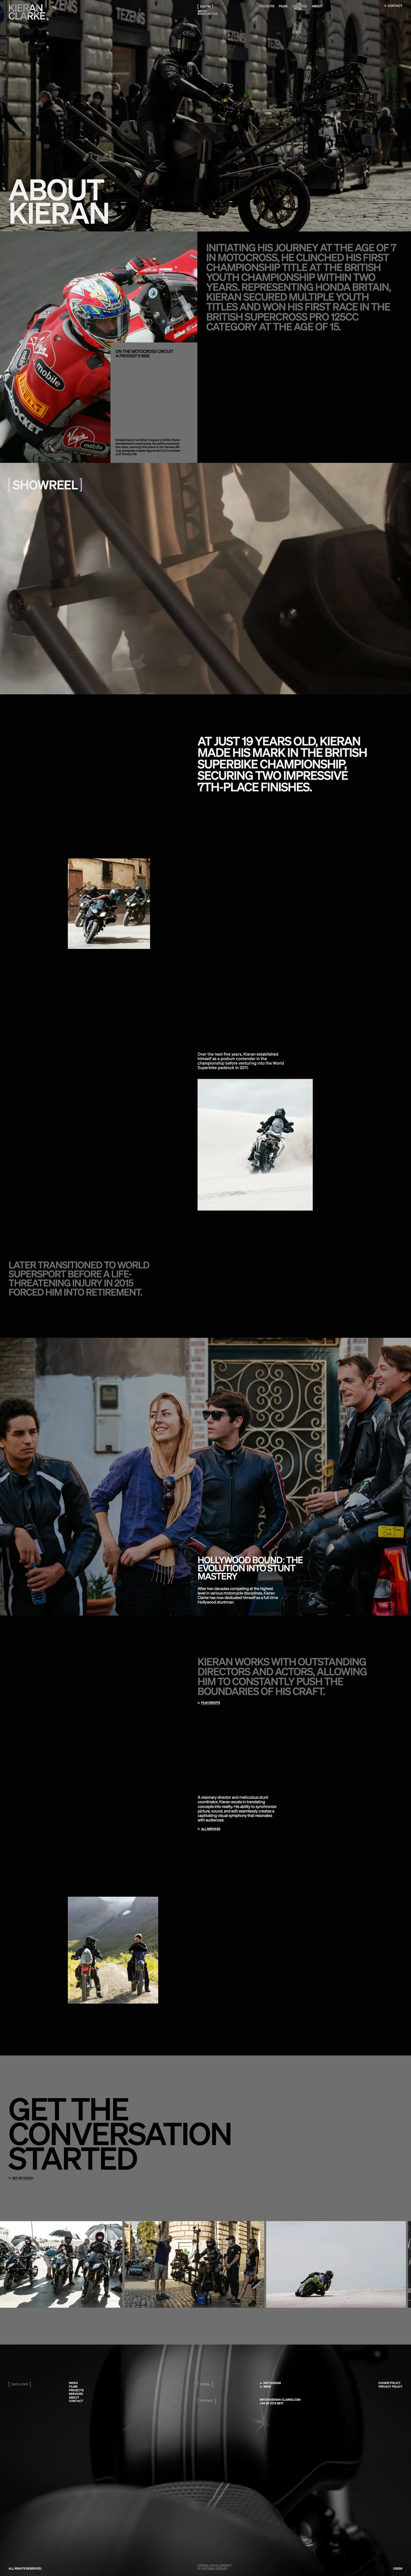 Kieran Clarke Landing Page Example: World championship motorcycle racer turned stuntman who specialises in the development of bespoke vehicles that are used for camera tracking applications in the Hollywood film industry.